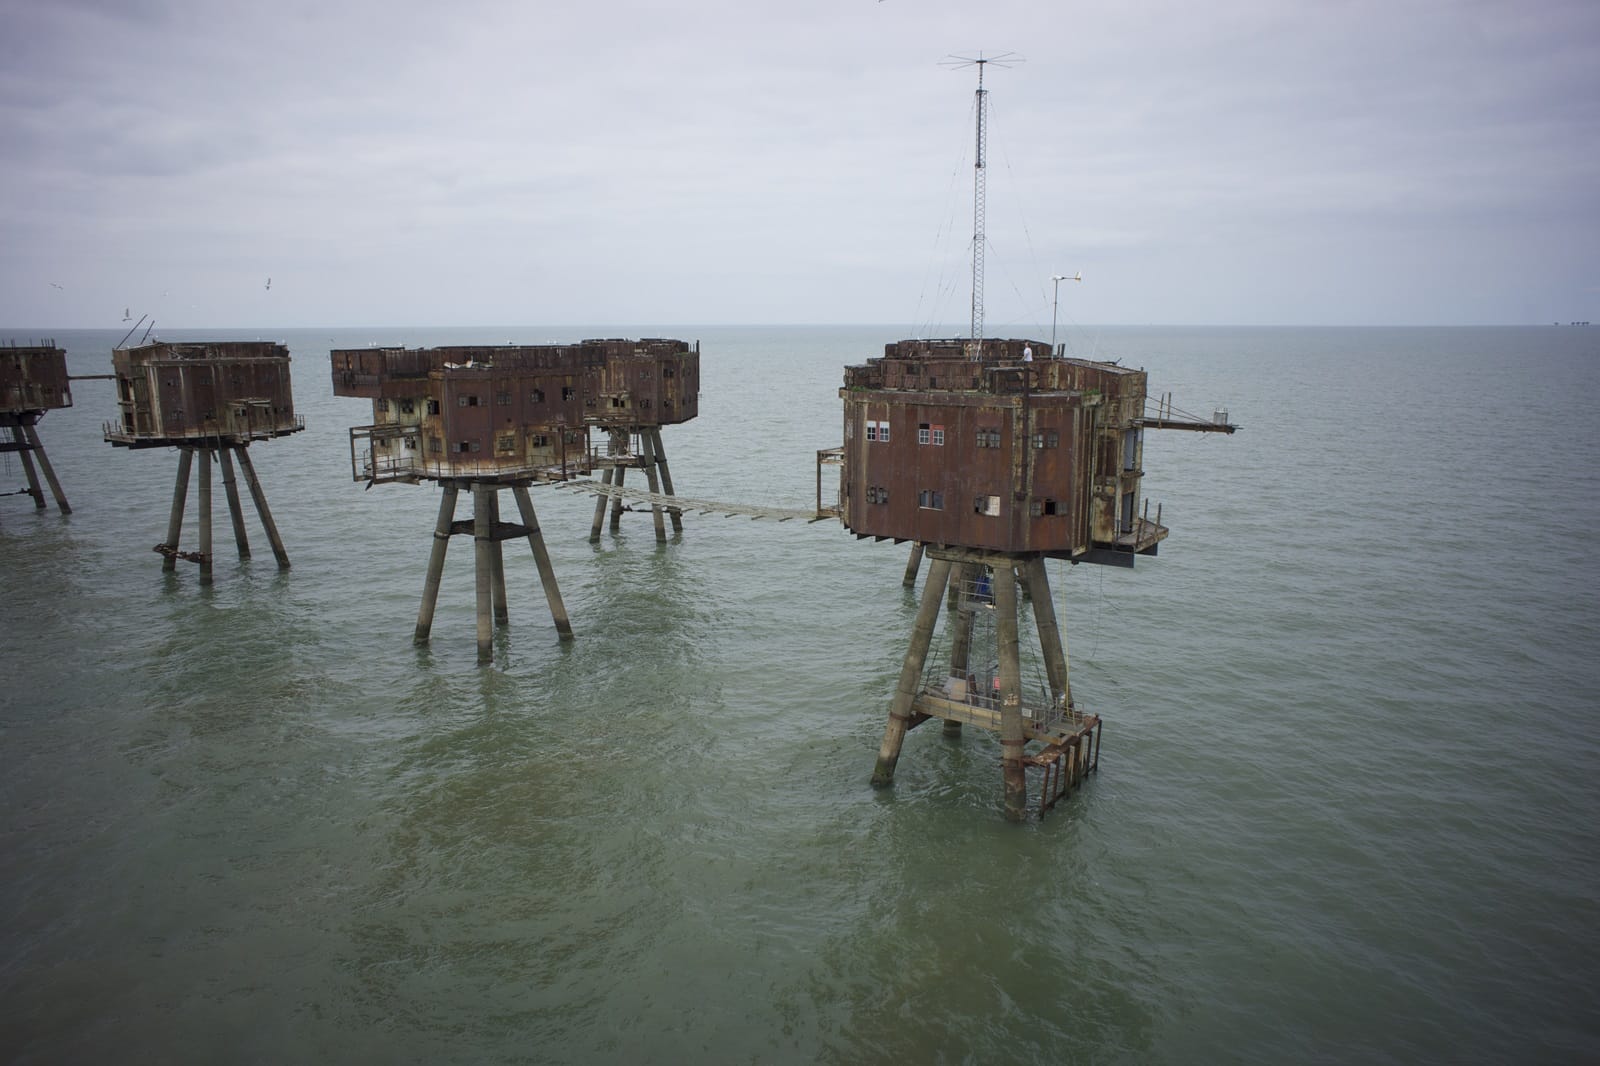 Image Credit: Shutterstock / The Drone Company <p><strong>6. The Maunsell Sea Forts</strong></p> <p>These wartime relics in the Thames Estuary are less “guardians of the sea” and more “tetanus shot waiting to happen.” They’re a renovation project for those who like their history with a side of danger.</p>